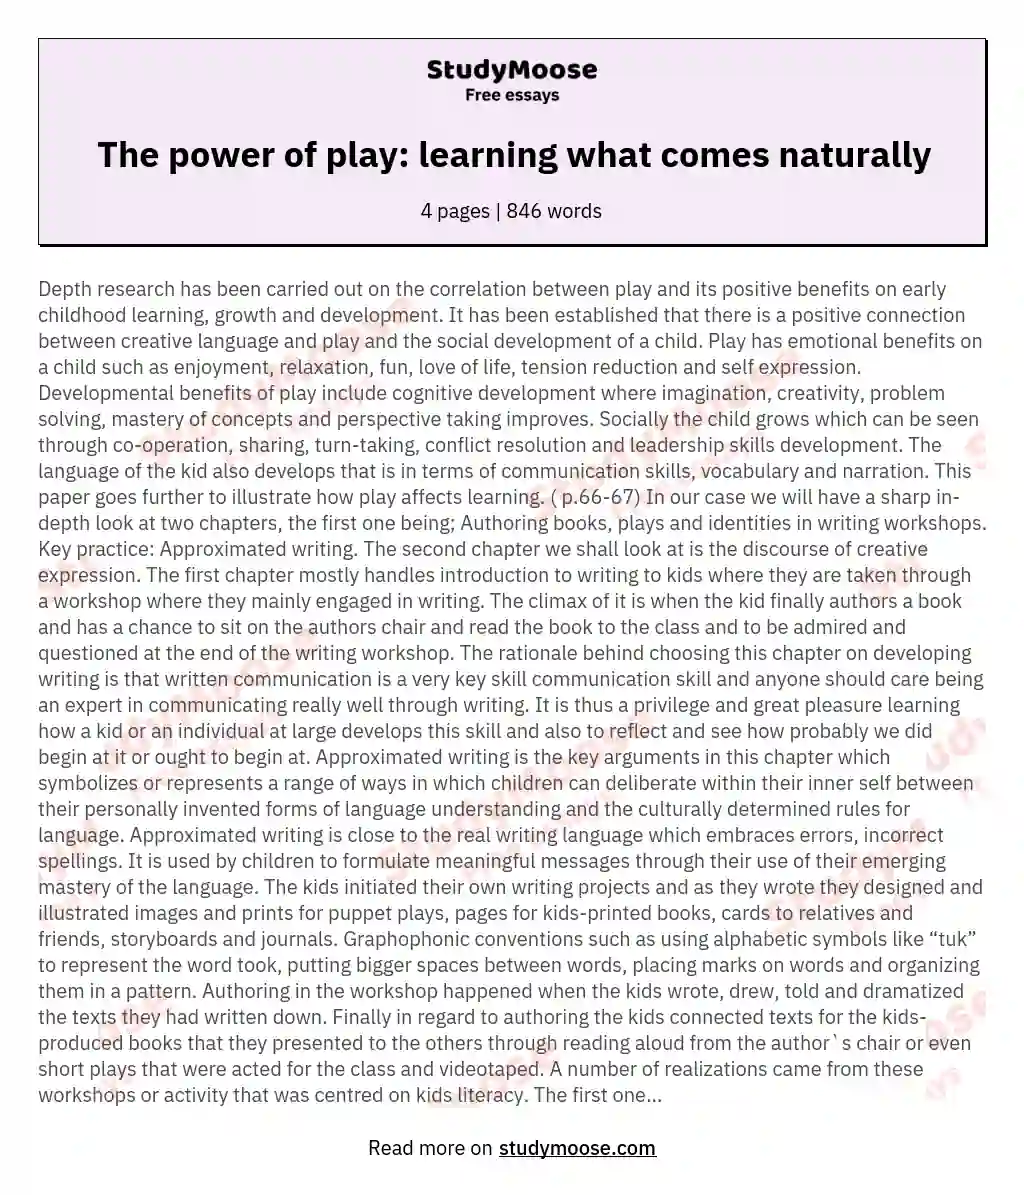 The power of play: learning what comes naturally